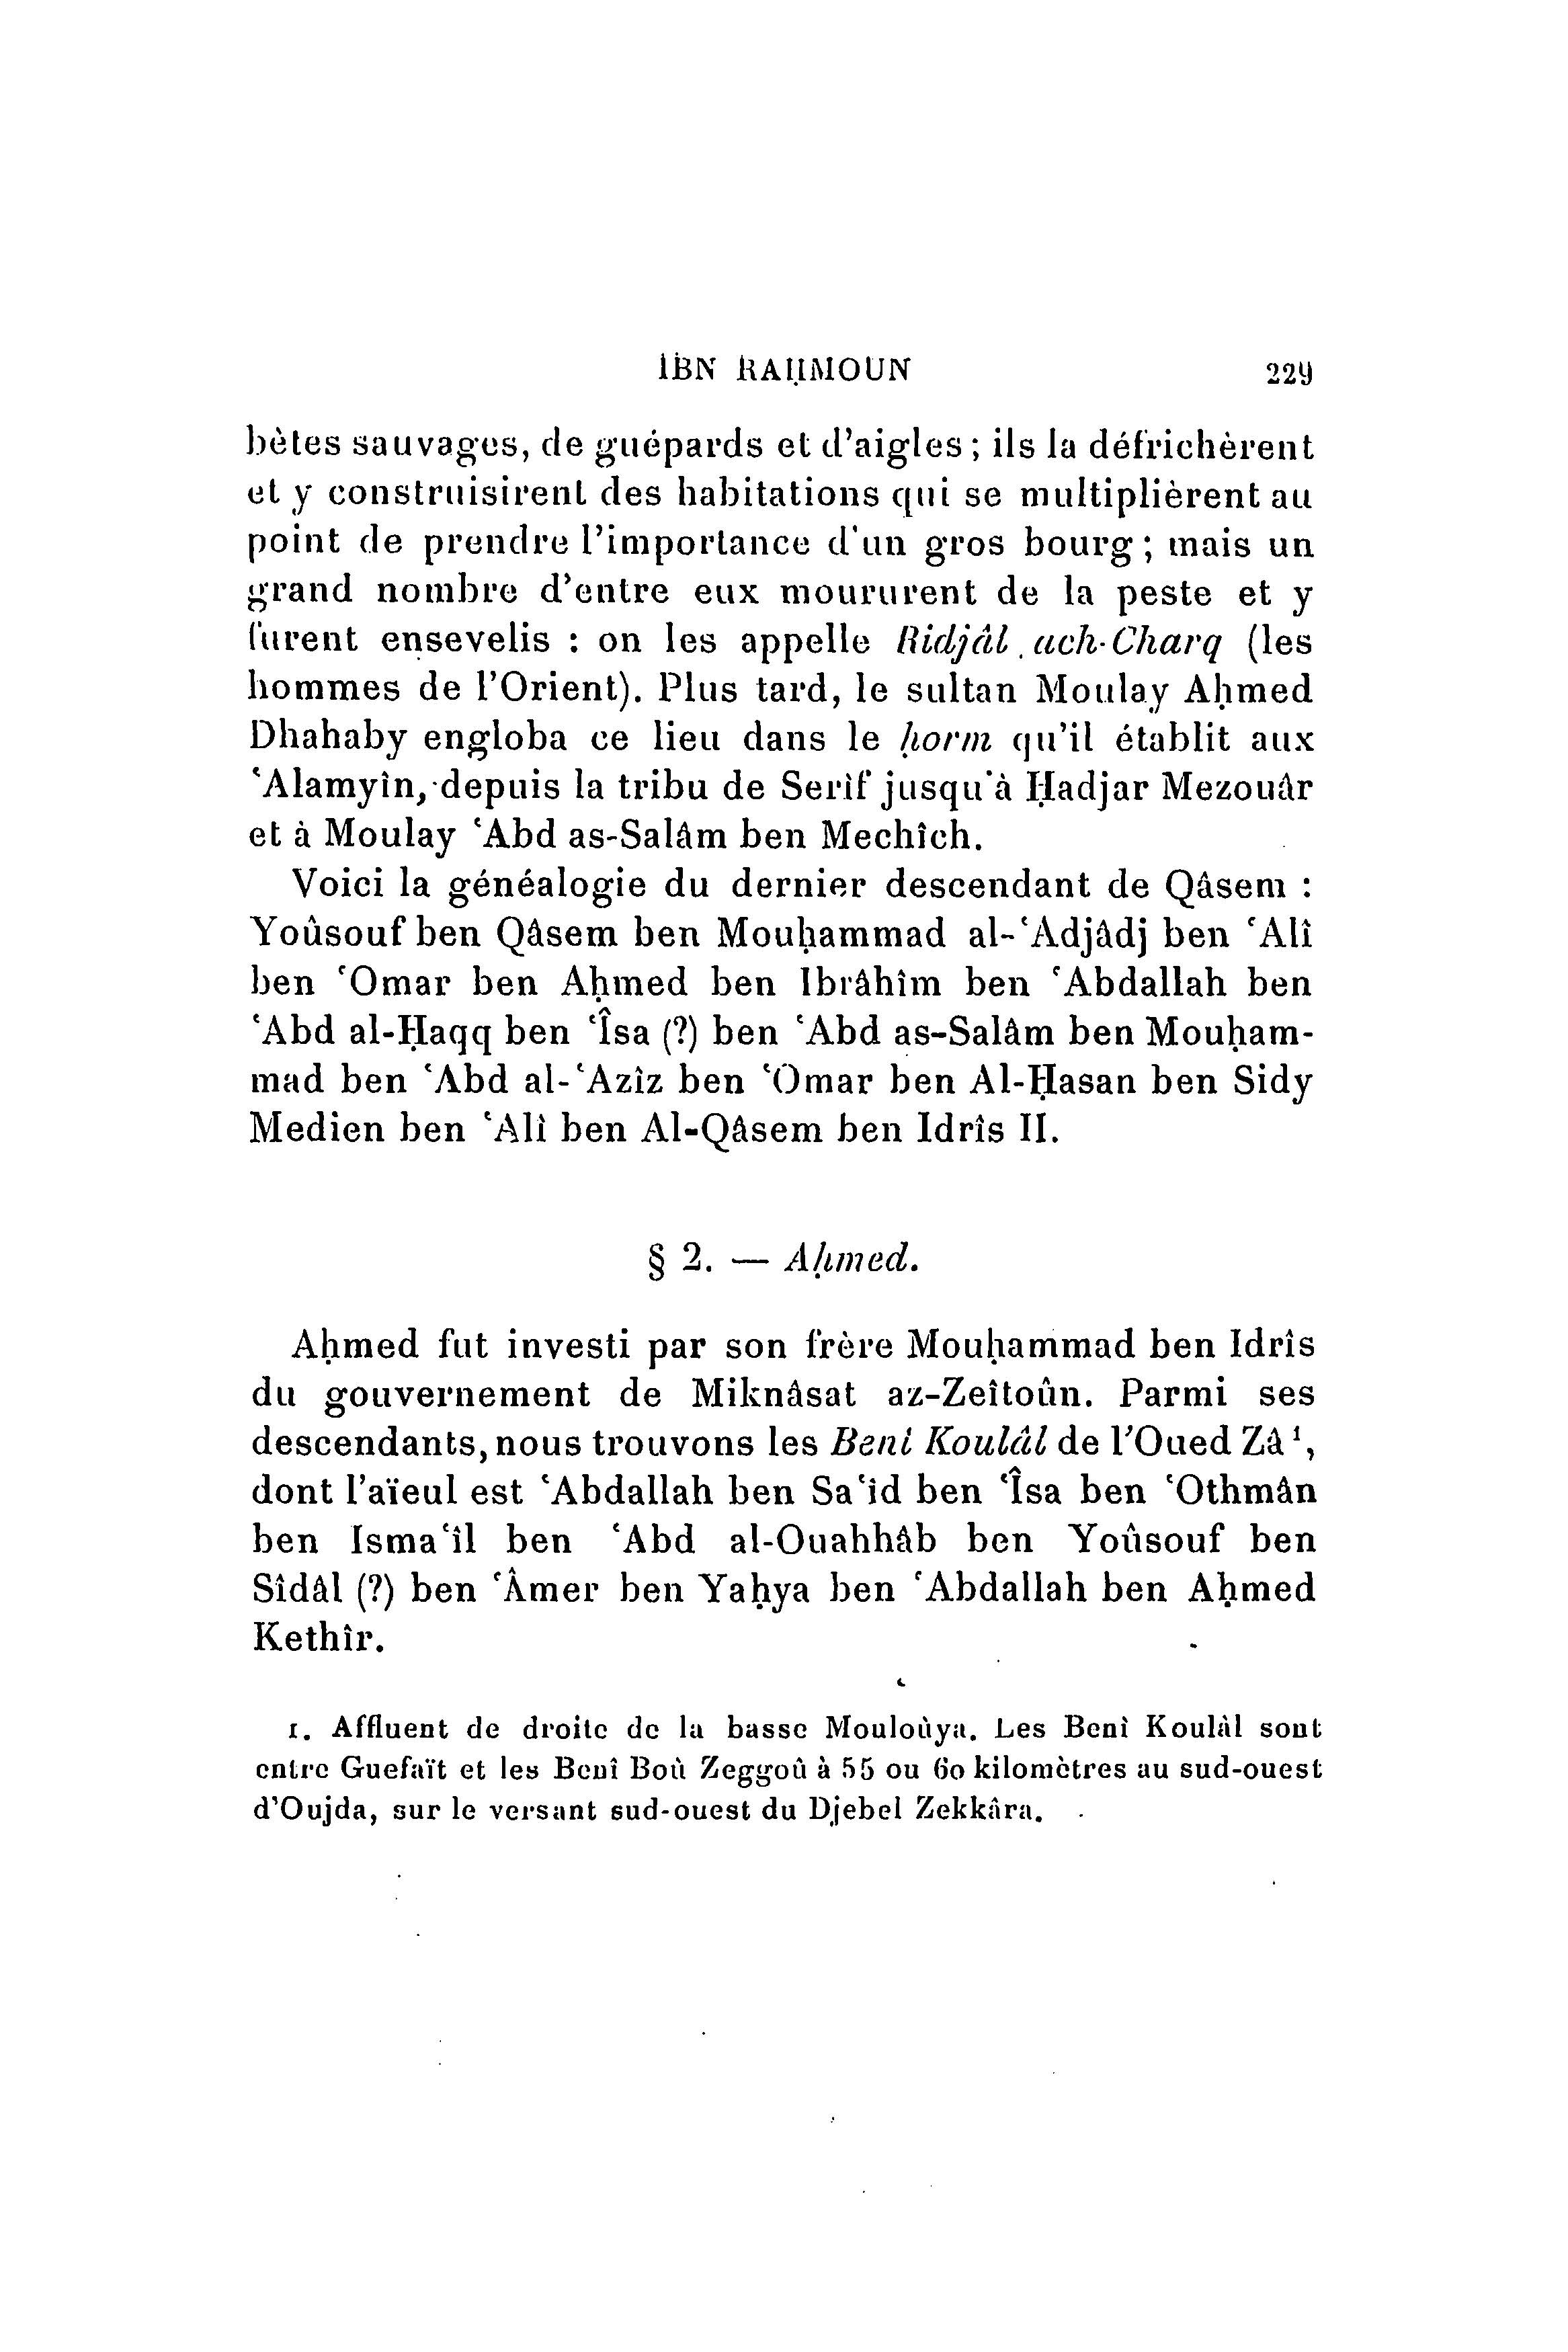 archives-marocaines-volume-03-1905_page_237